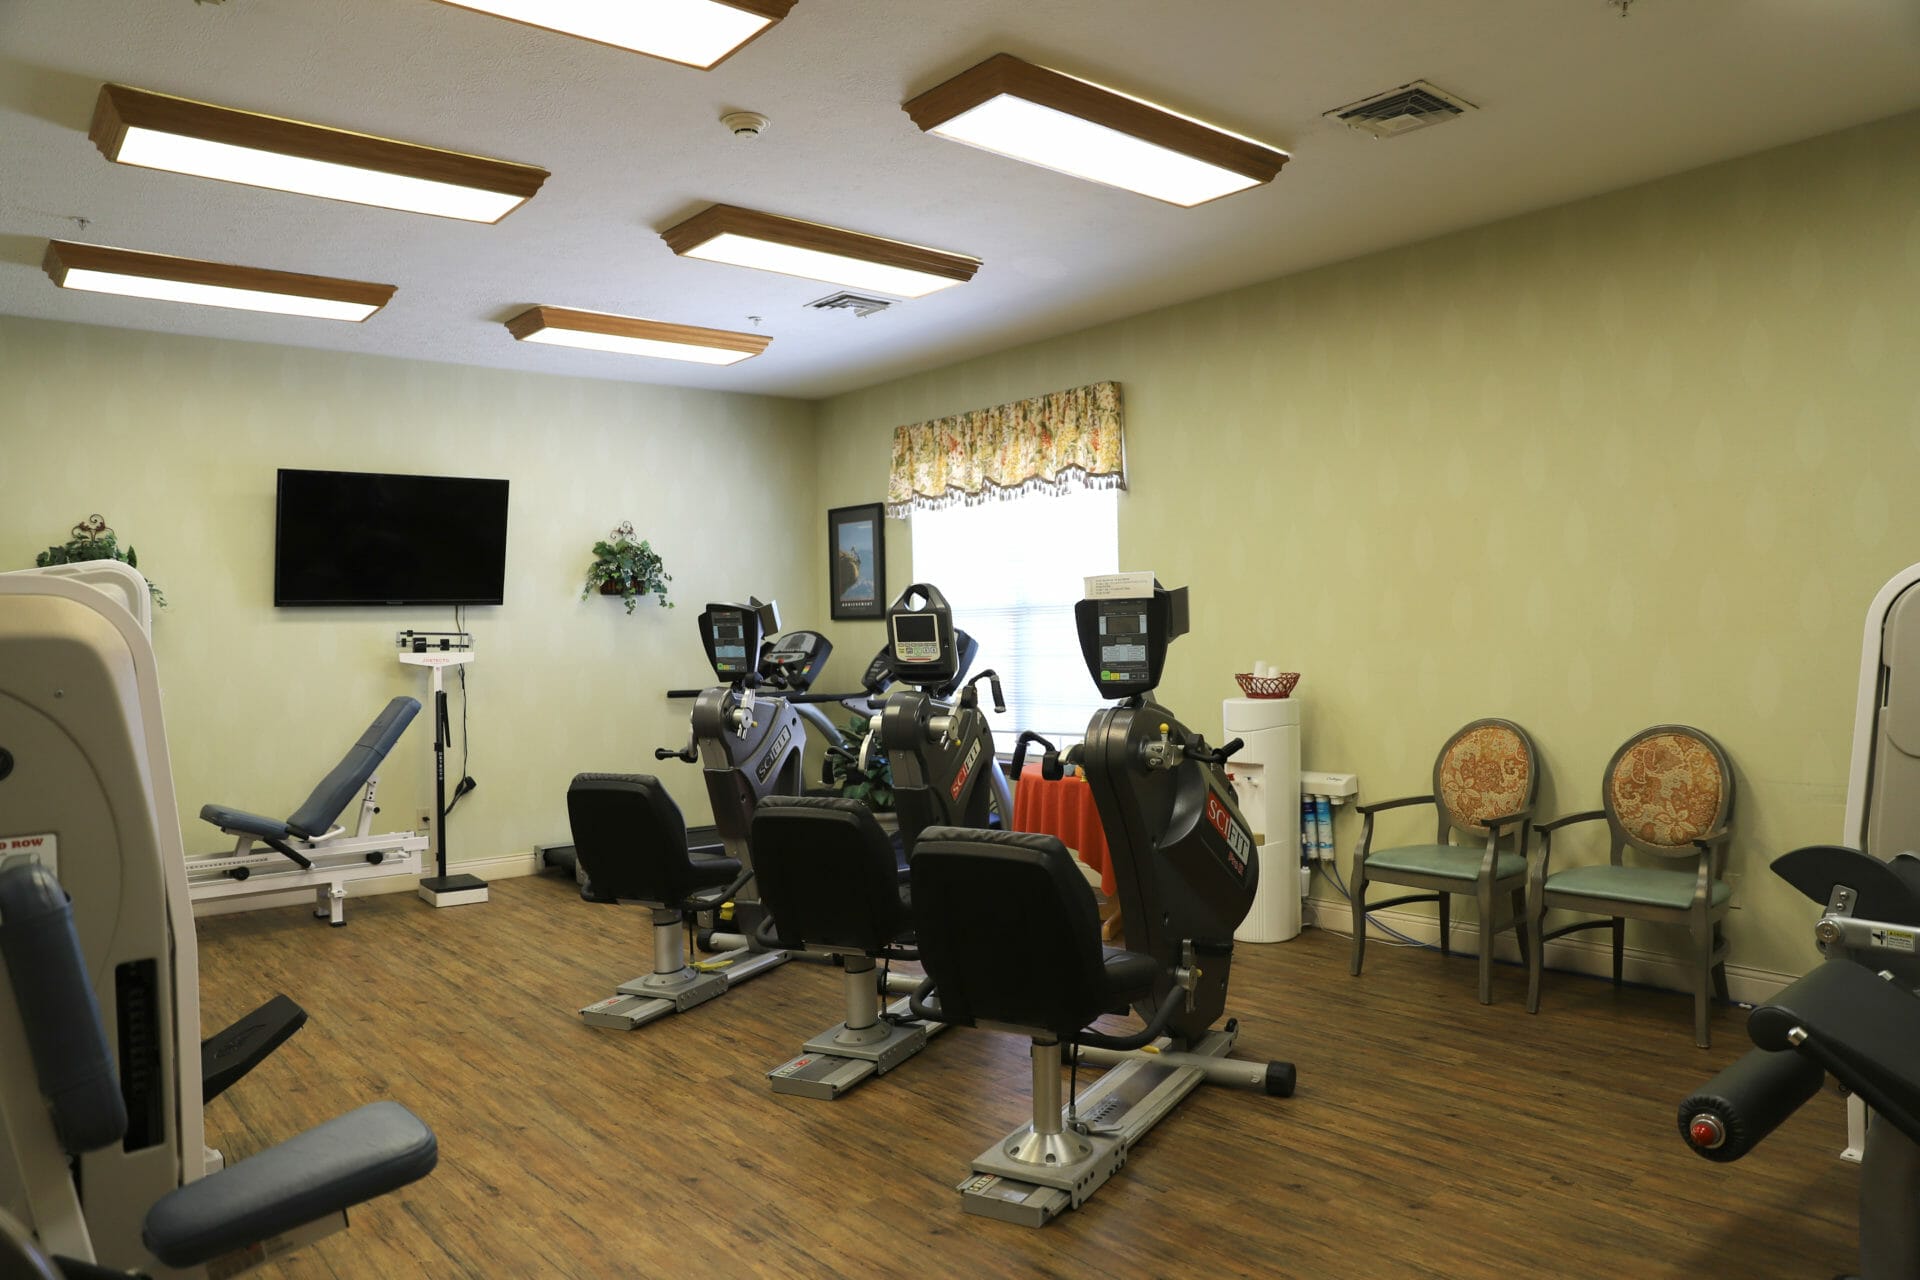 <span  class="uc_style_uc_tiles_grid_image_elementor_uc_items_attribute_title" style="color:#000000;">Meadow Lakes New Energy Wellness Room with exercise equipment. </span>